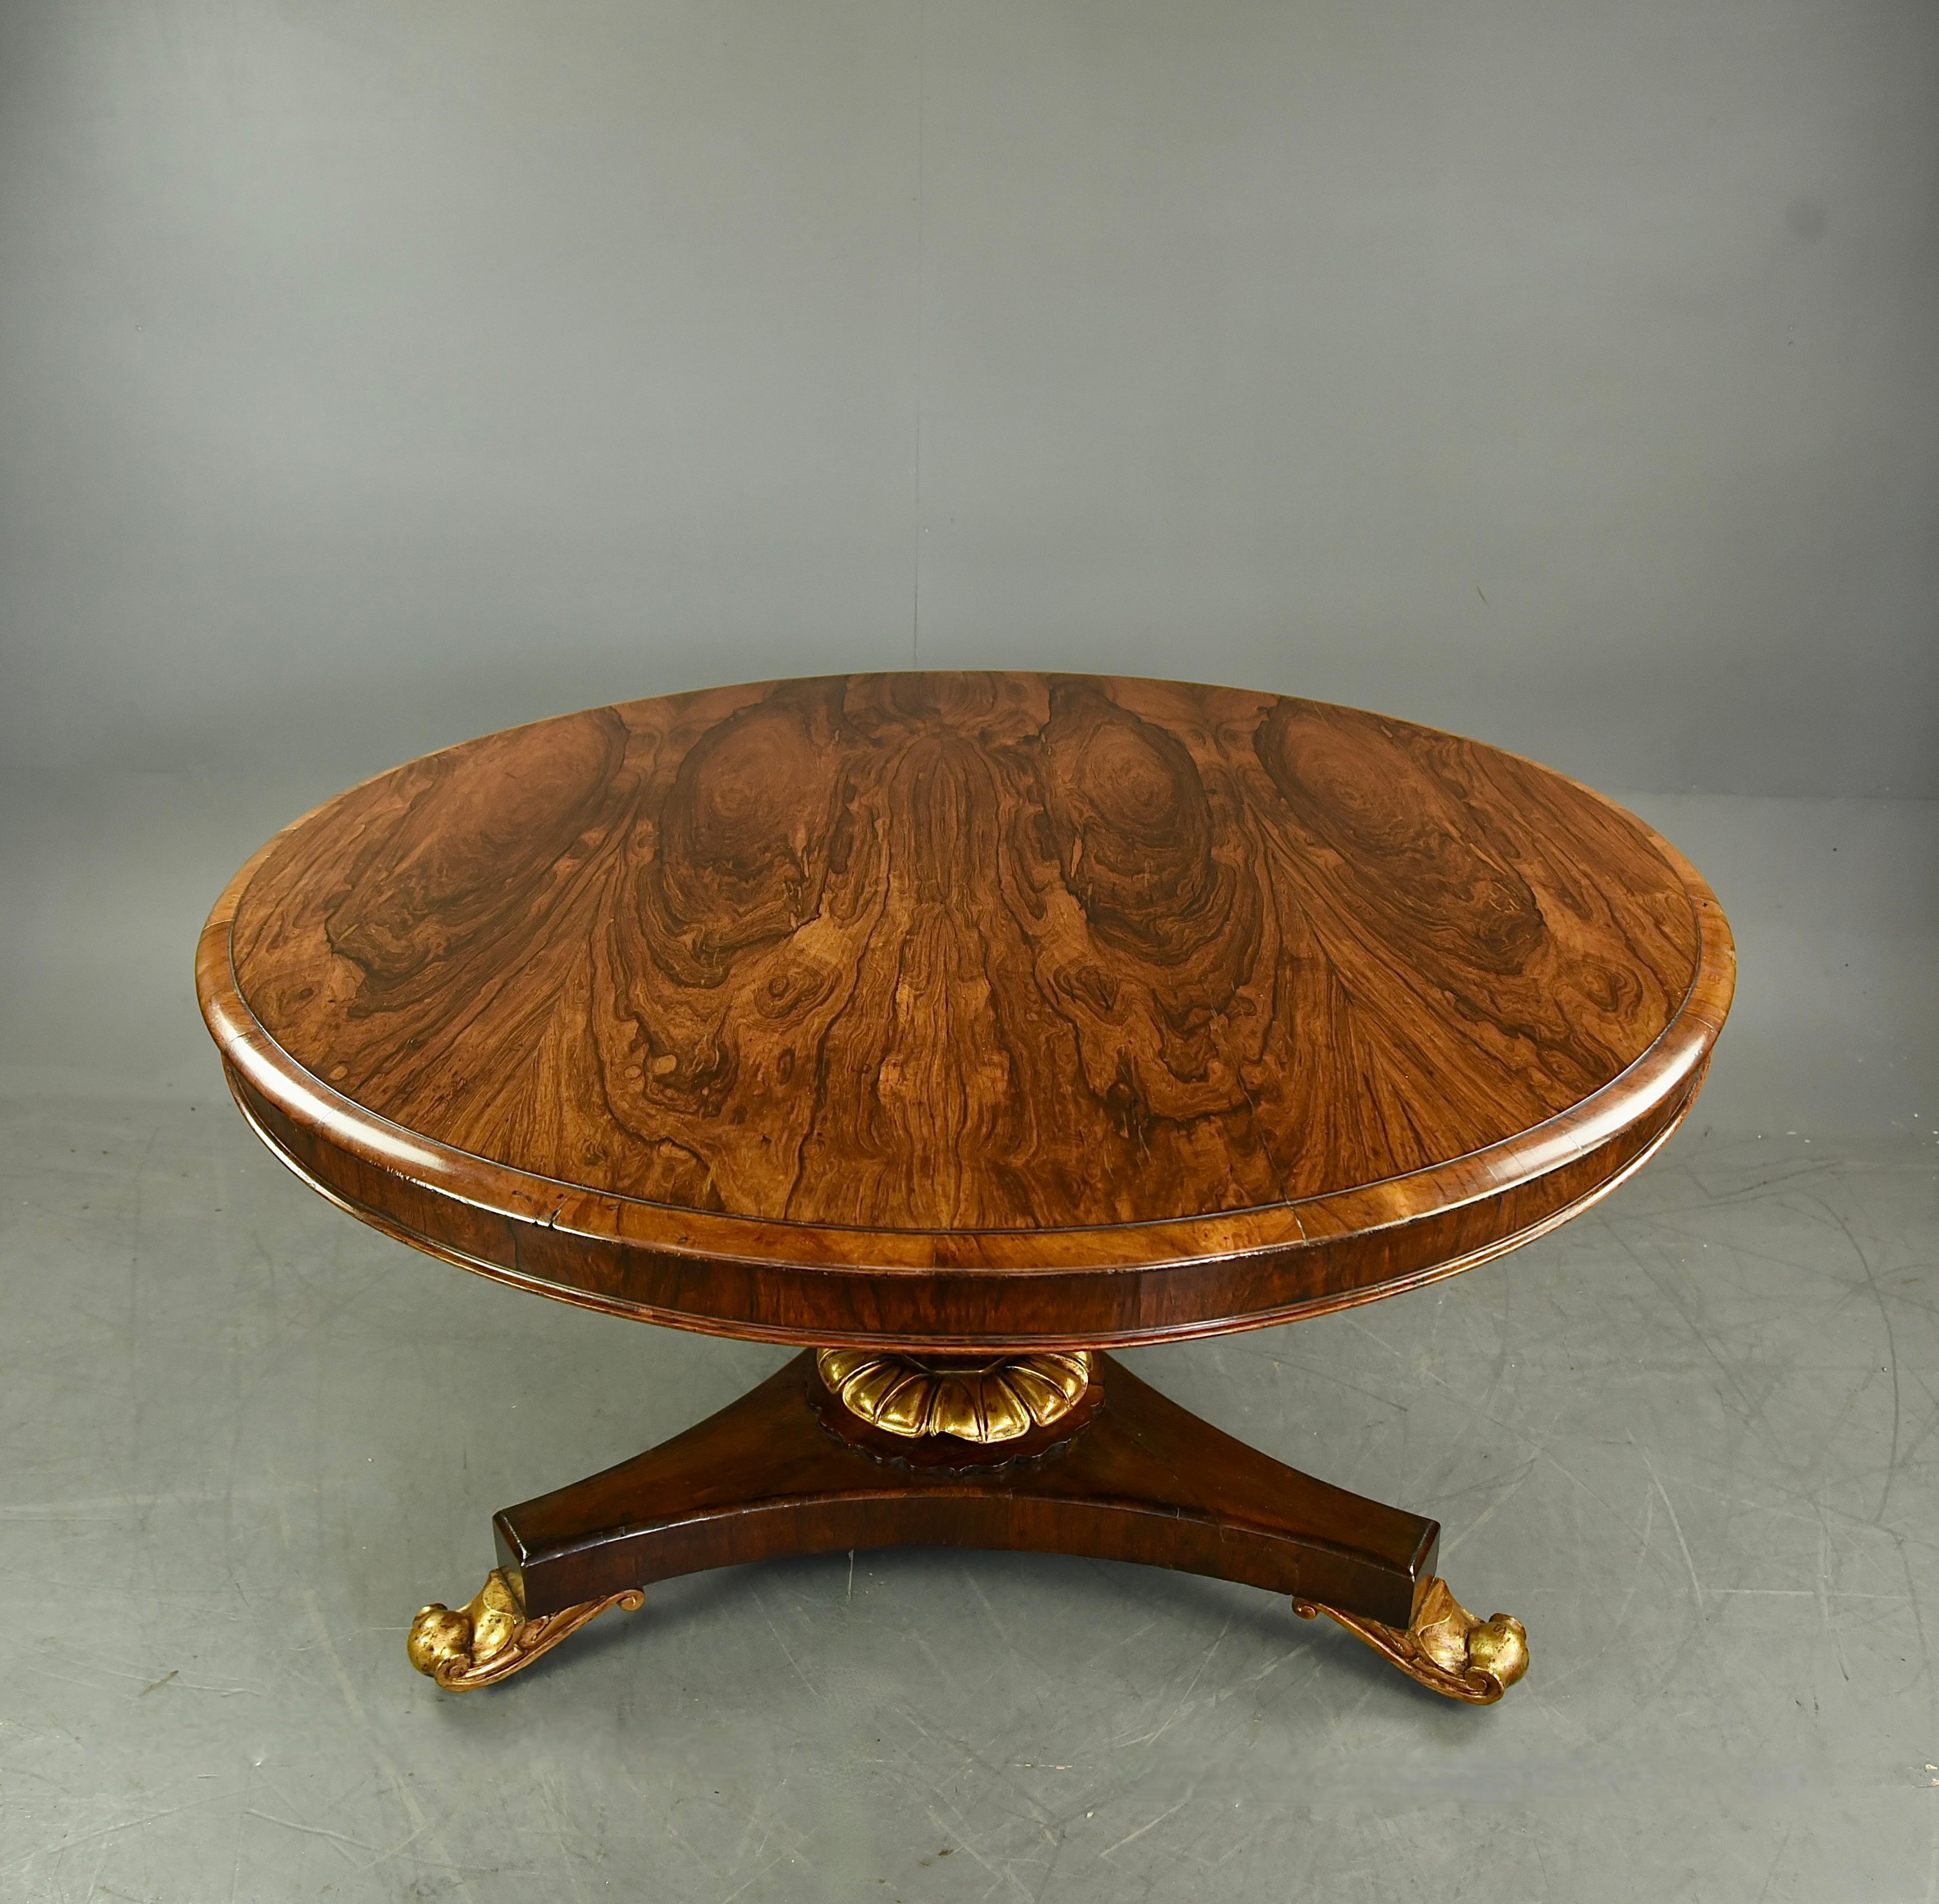 Very fine William iv Rosewood dining centre table by John wells off 210 Regent street London (stamped) A very well know quality furniture listed as trading between 1839-1845 and recorded 1845 in the London post office directory .
The table has a